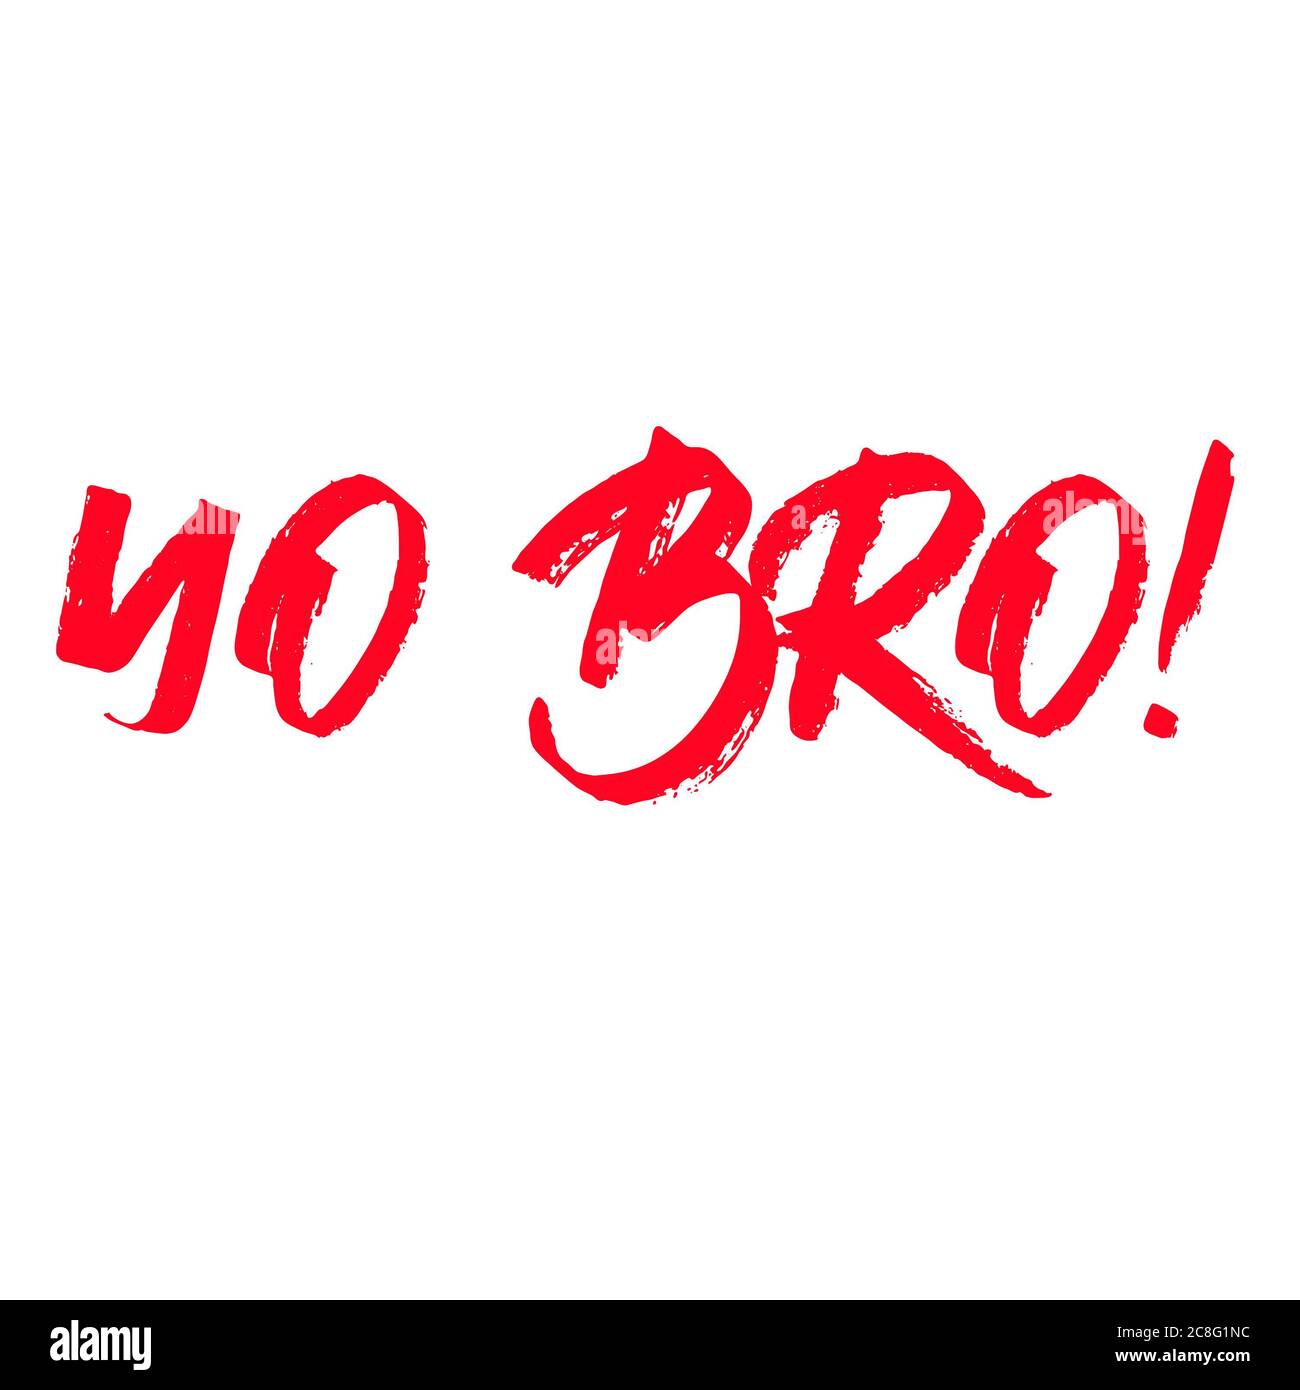 Yo bro inscription. Red calligraphic text on white background. Ink illustration Stock Photo